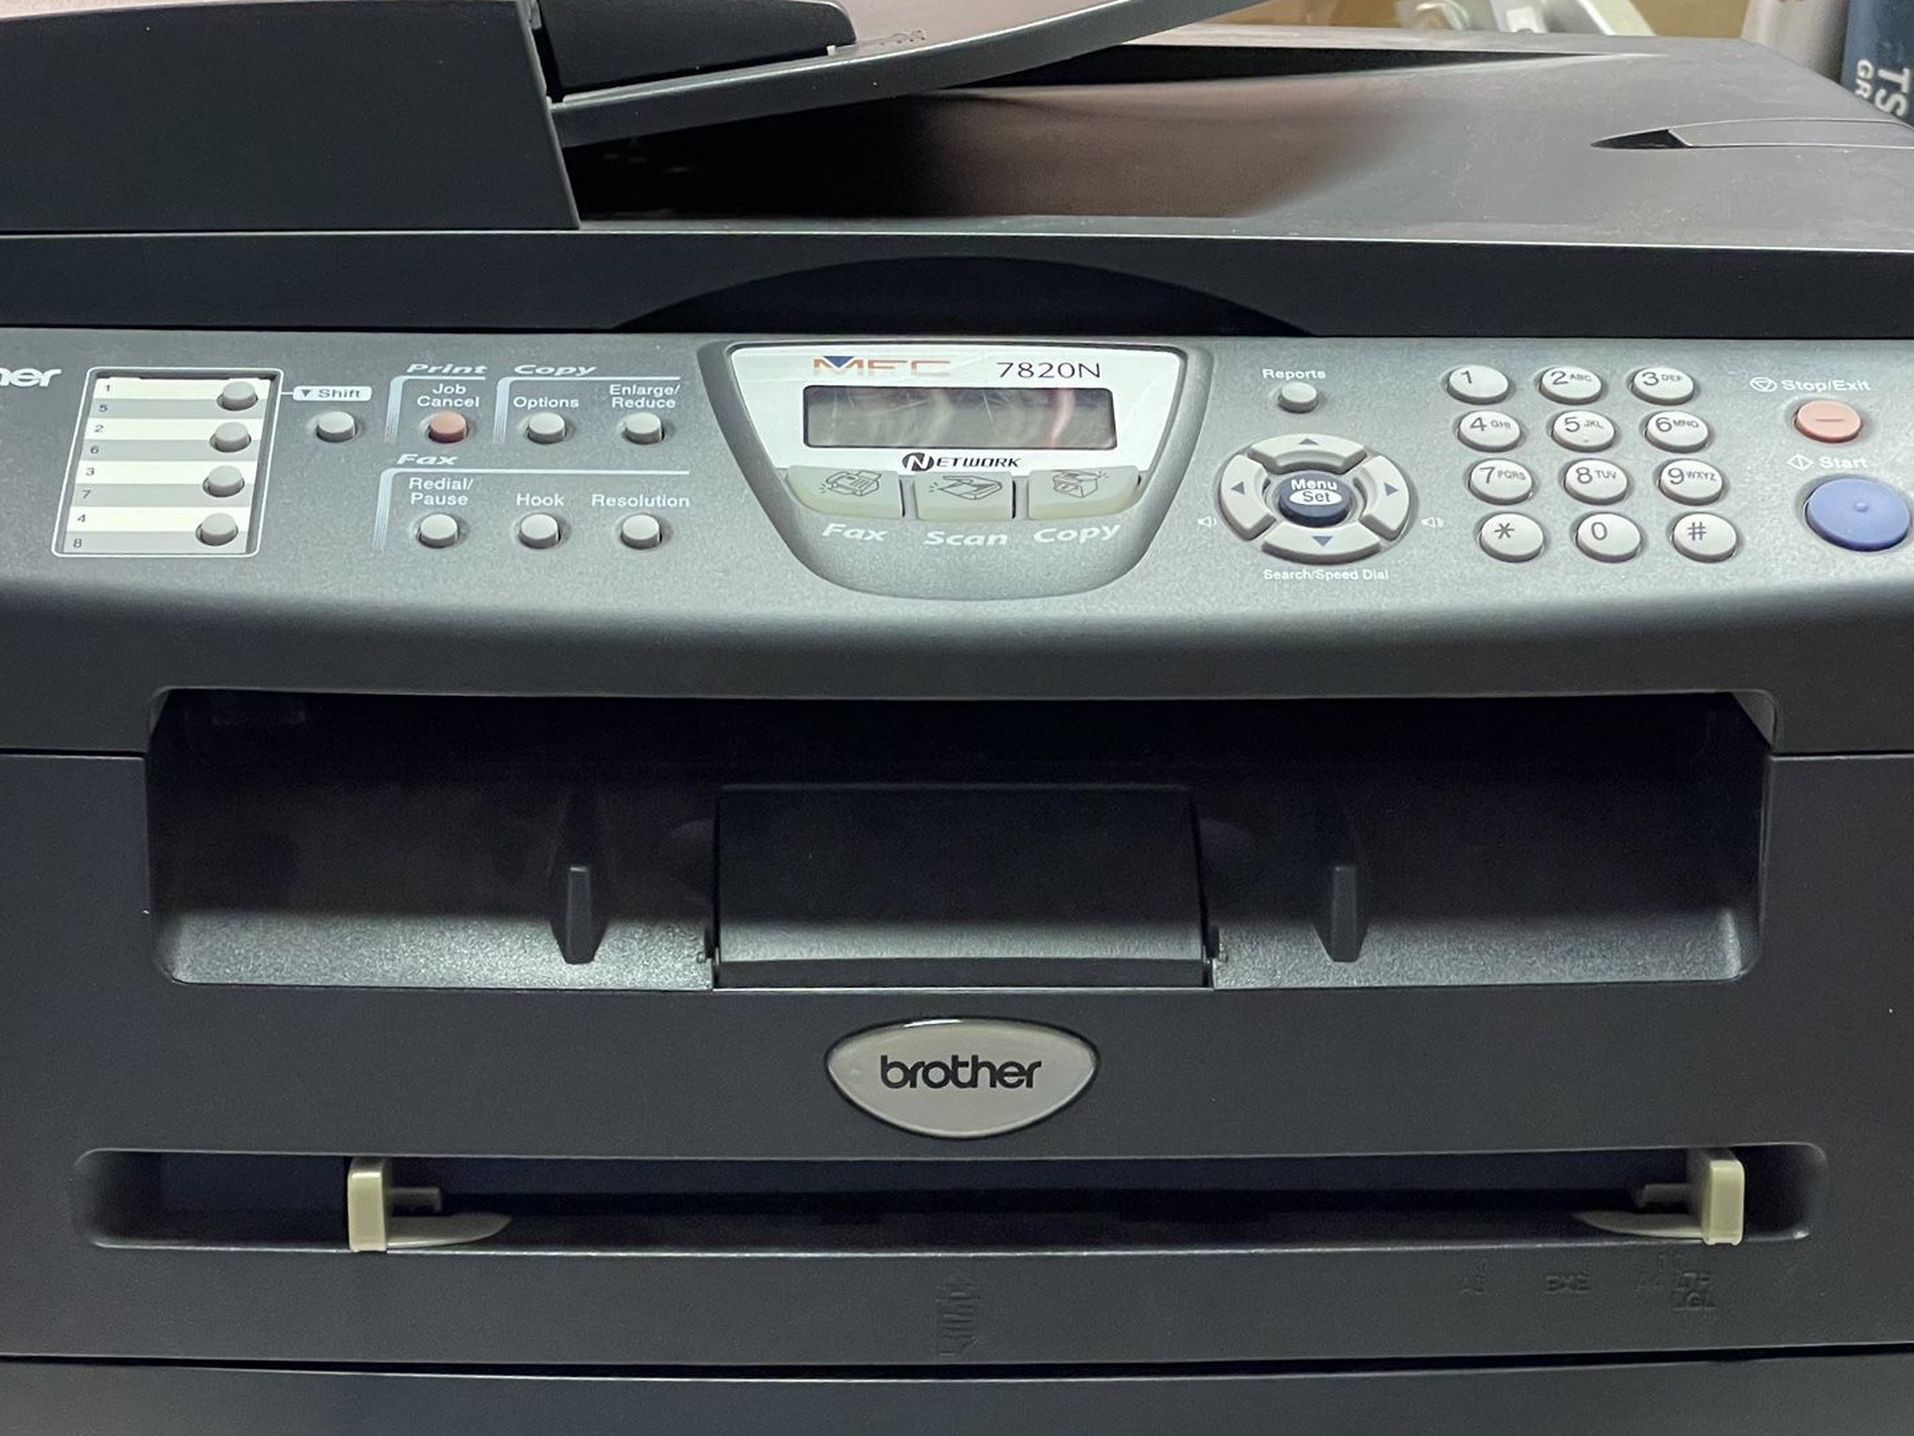 Brother MFC-7820N Workgroup Monochrome Laser Printer